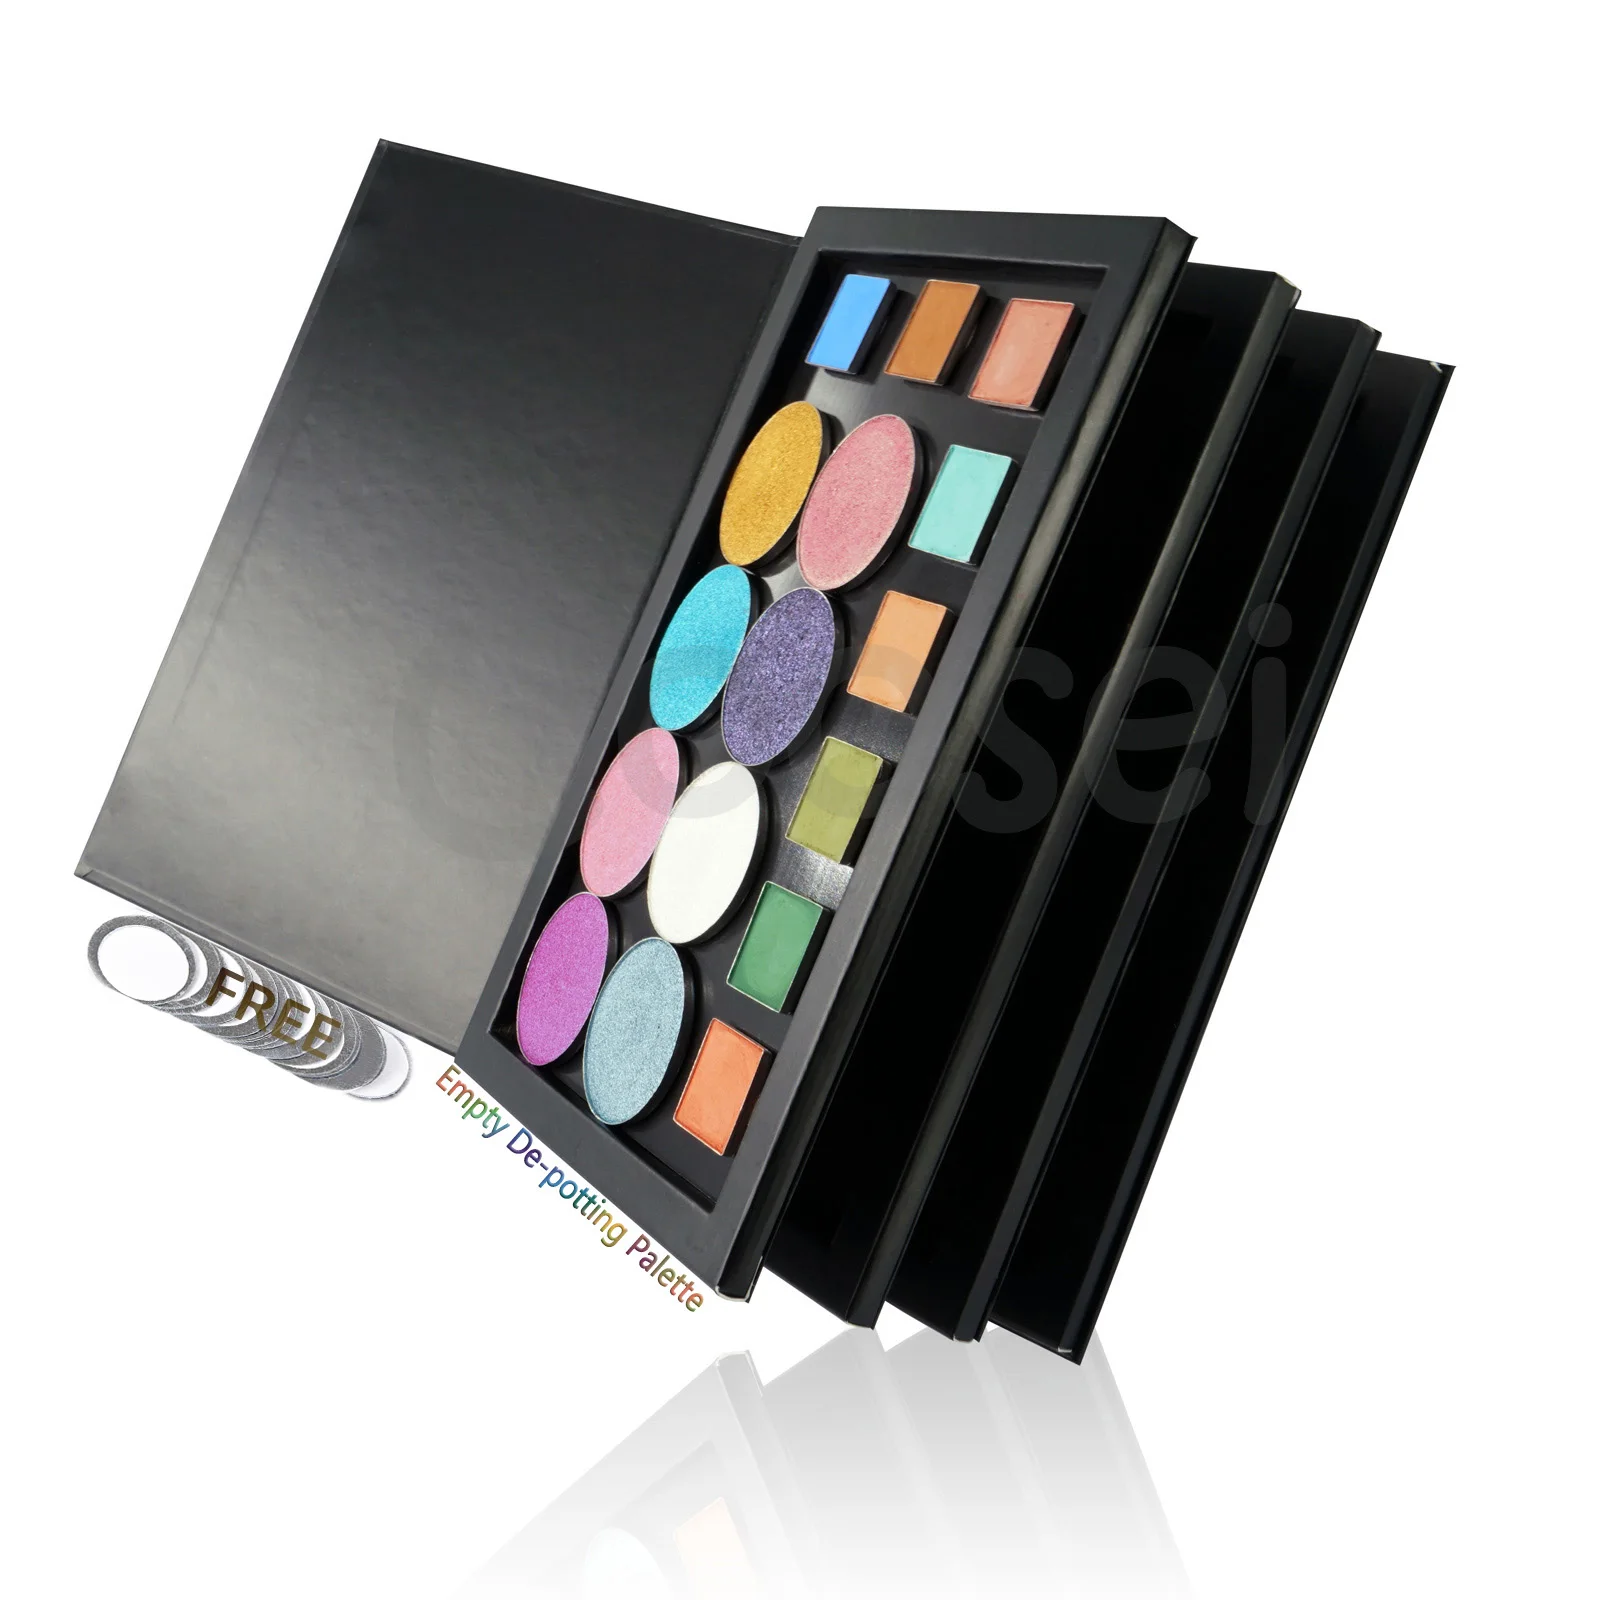 Coosei Book Shaped New Extra Large Magnetic Eyeshadow Pallete 3/4 Layers EMPTY Big Makeup Palette Storage Box 60pcs 36mm Shadows